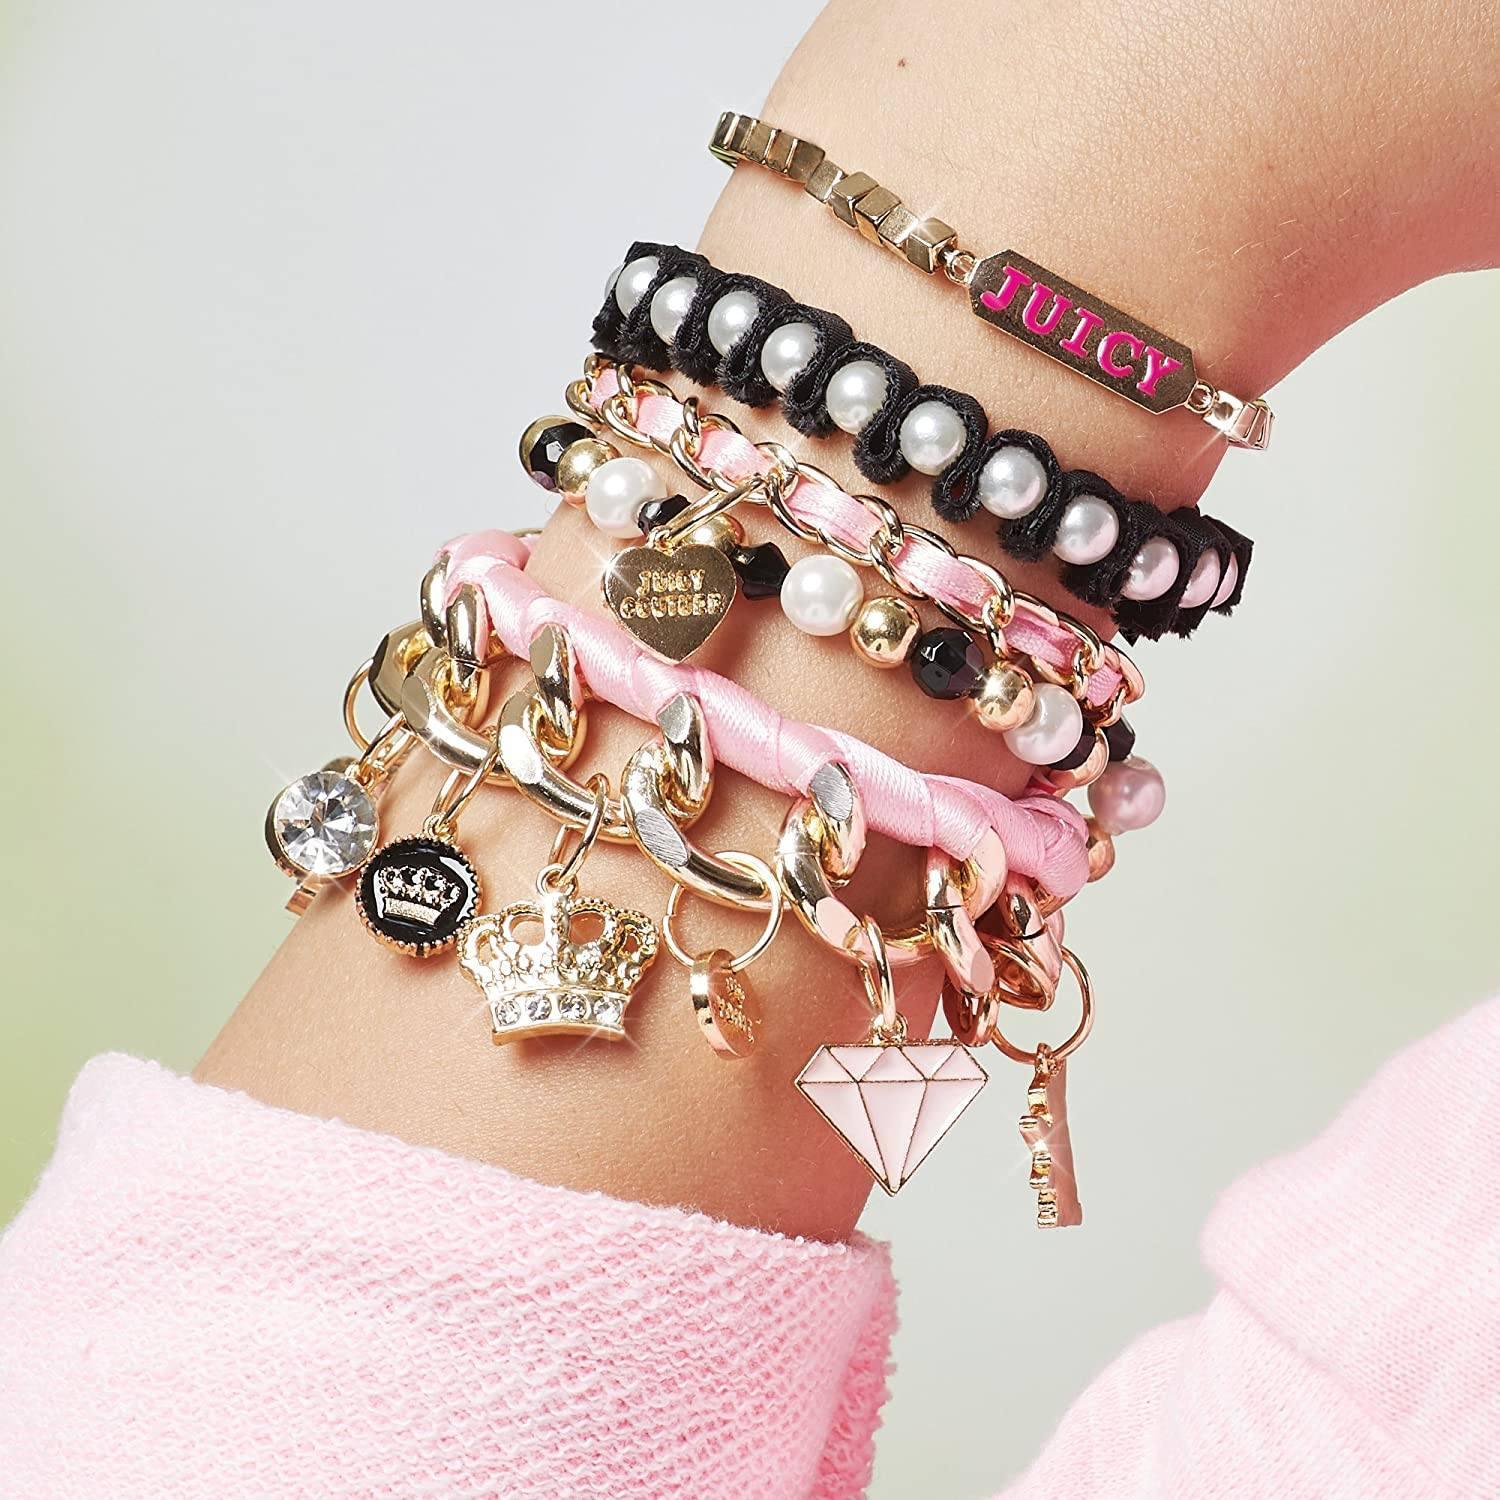 Make It Real - Juicy Couture Jewellery Chains and Charms – TOYBOX